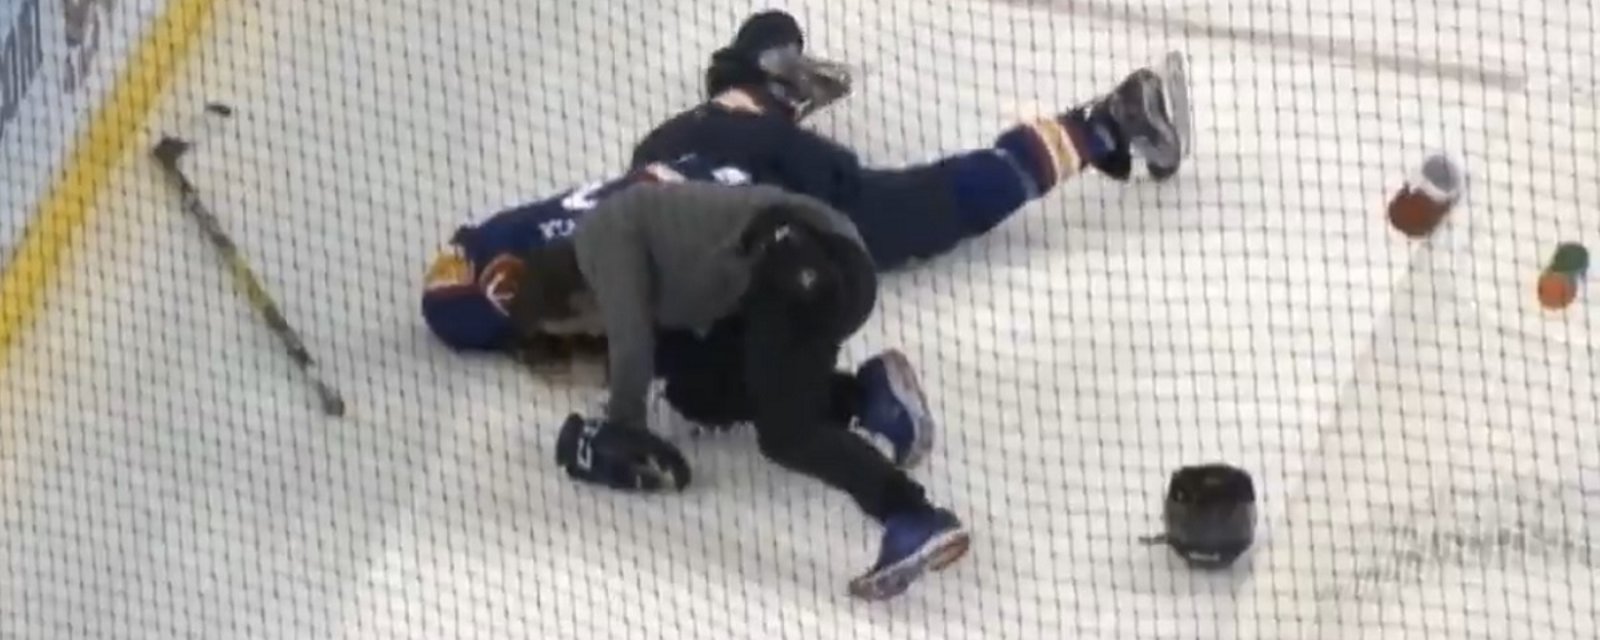 Video: Brutal hit leaves player with broken back and punctured lung,